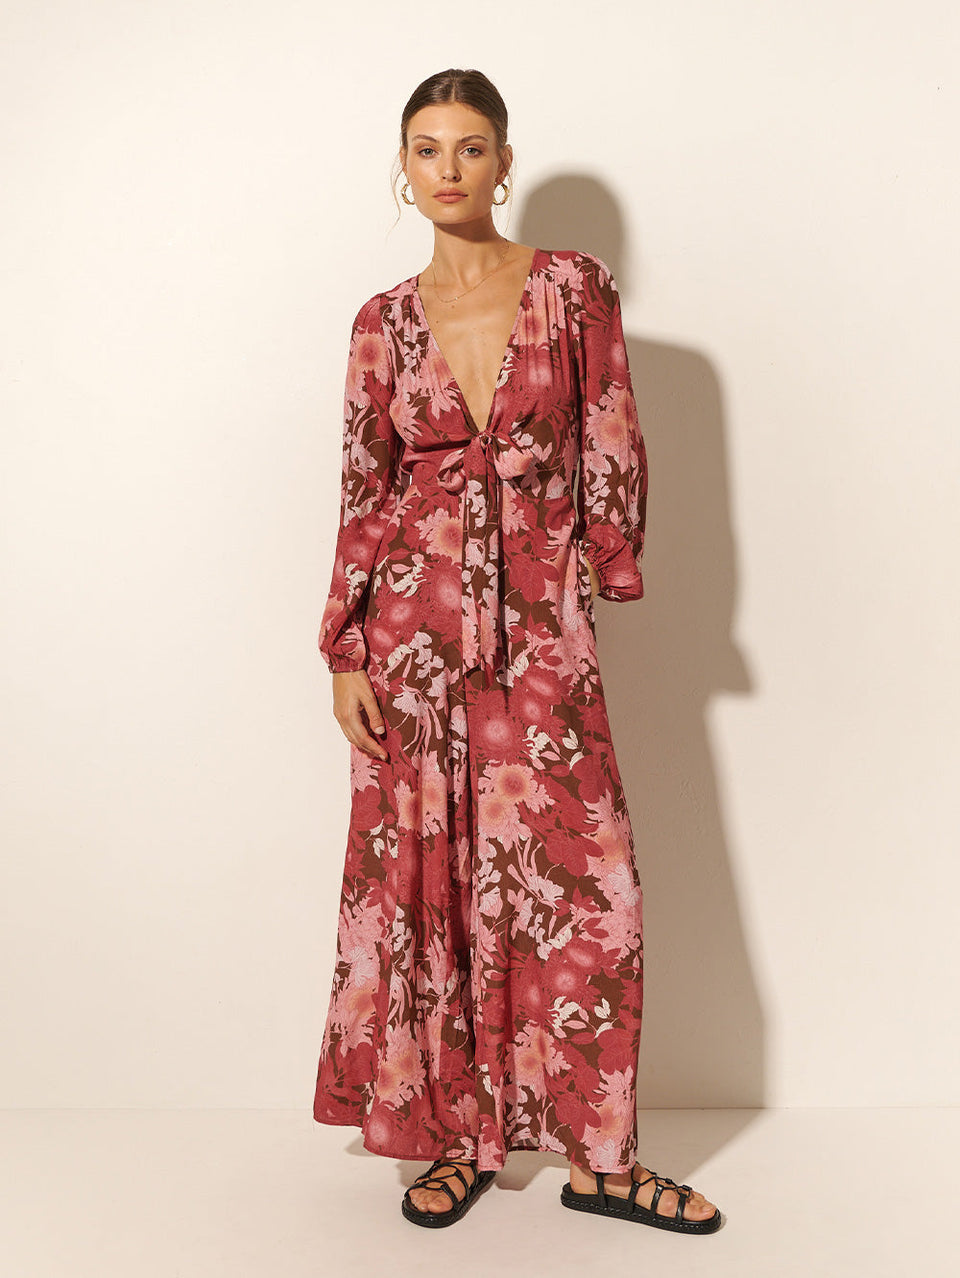 Studio model wears KIVARI Hacienda Jumpsuit: A red, pink and brown floral jumpsuit with ribbon tie front and long sleeves, crafted from sustainable LENZING Viscose Crepe.